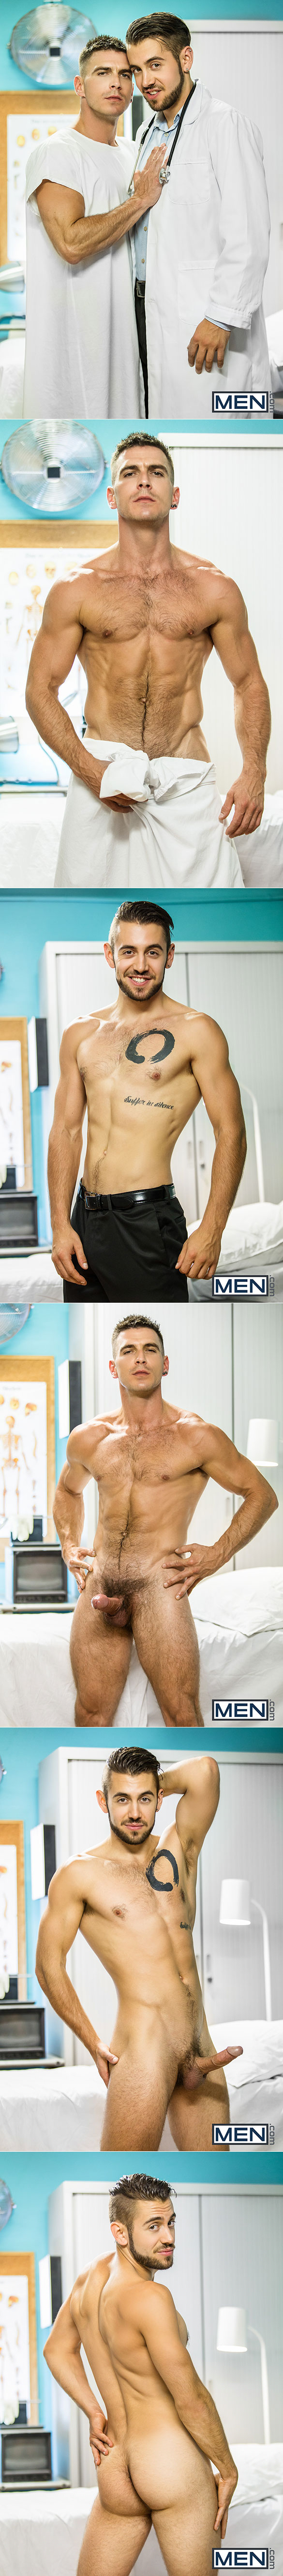 Men.com: Paddy O'Brian pounds Dante Colle in "Emergency Sex, Part 1"